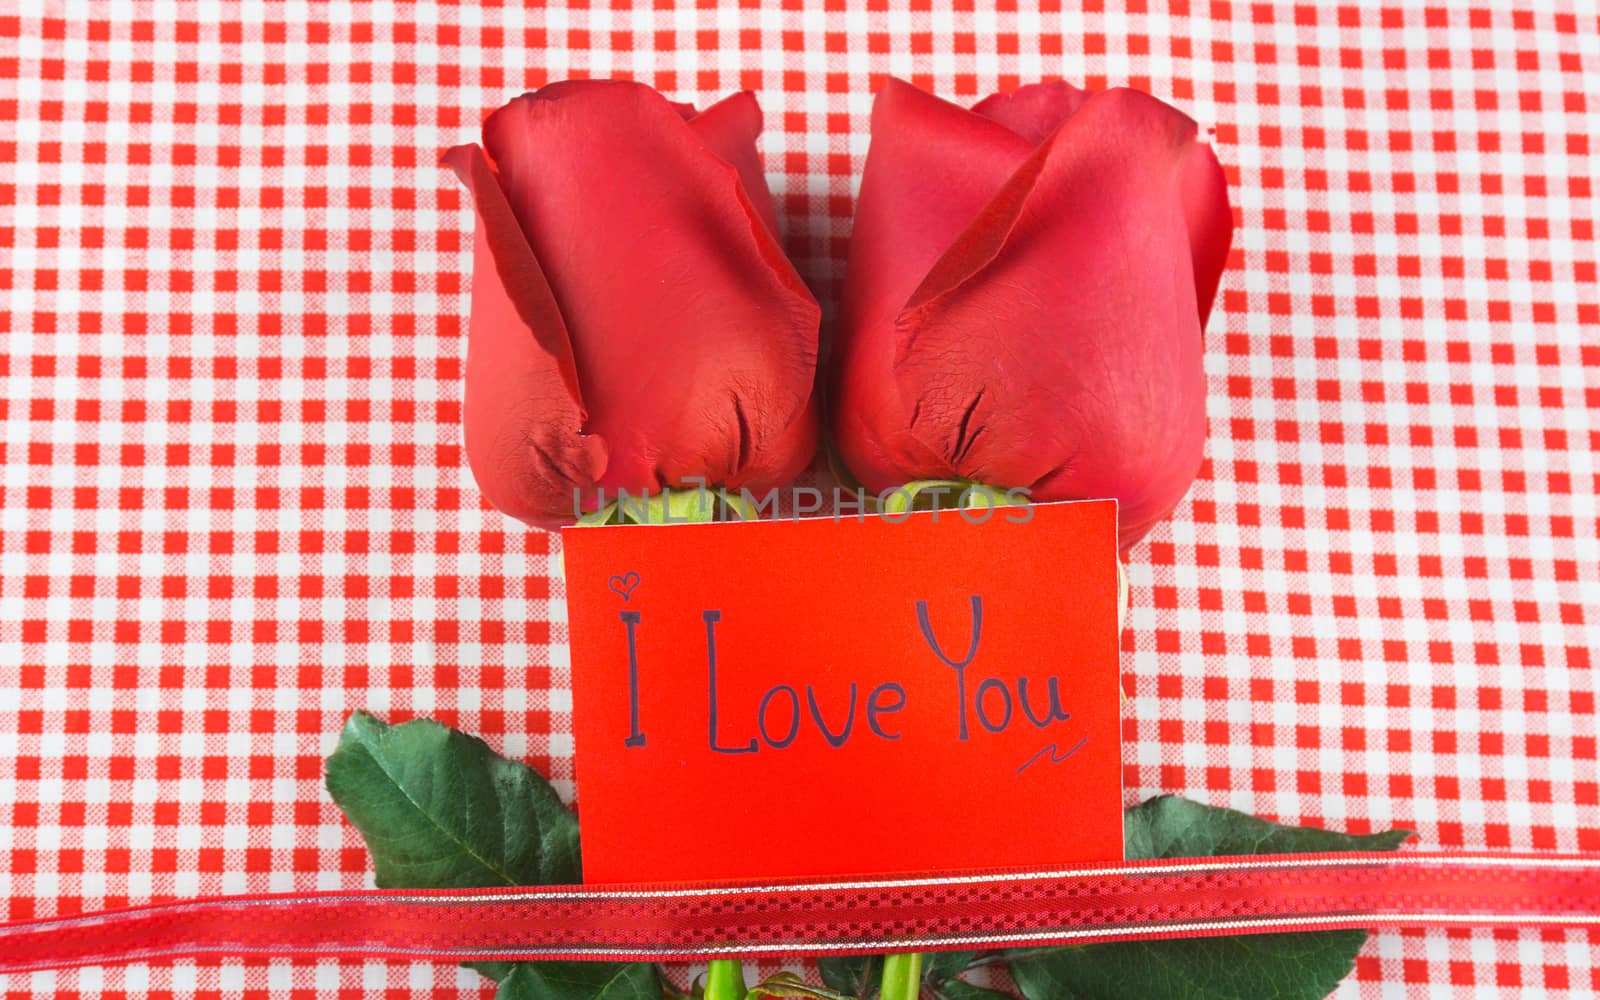 Red rose with message card Image of Valentines day by nopparats